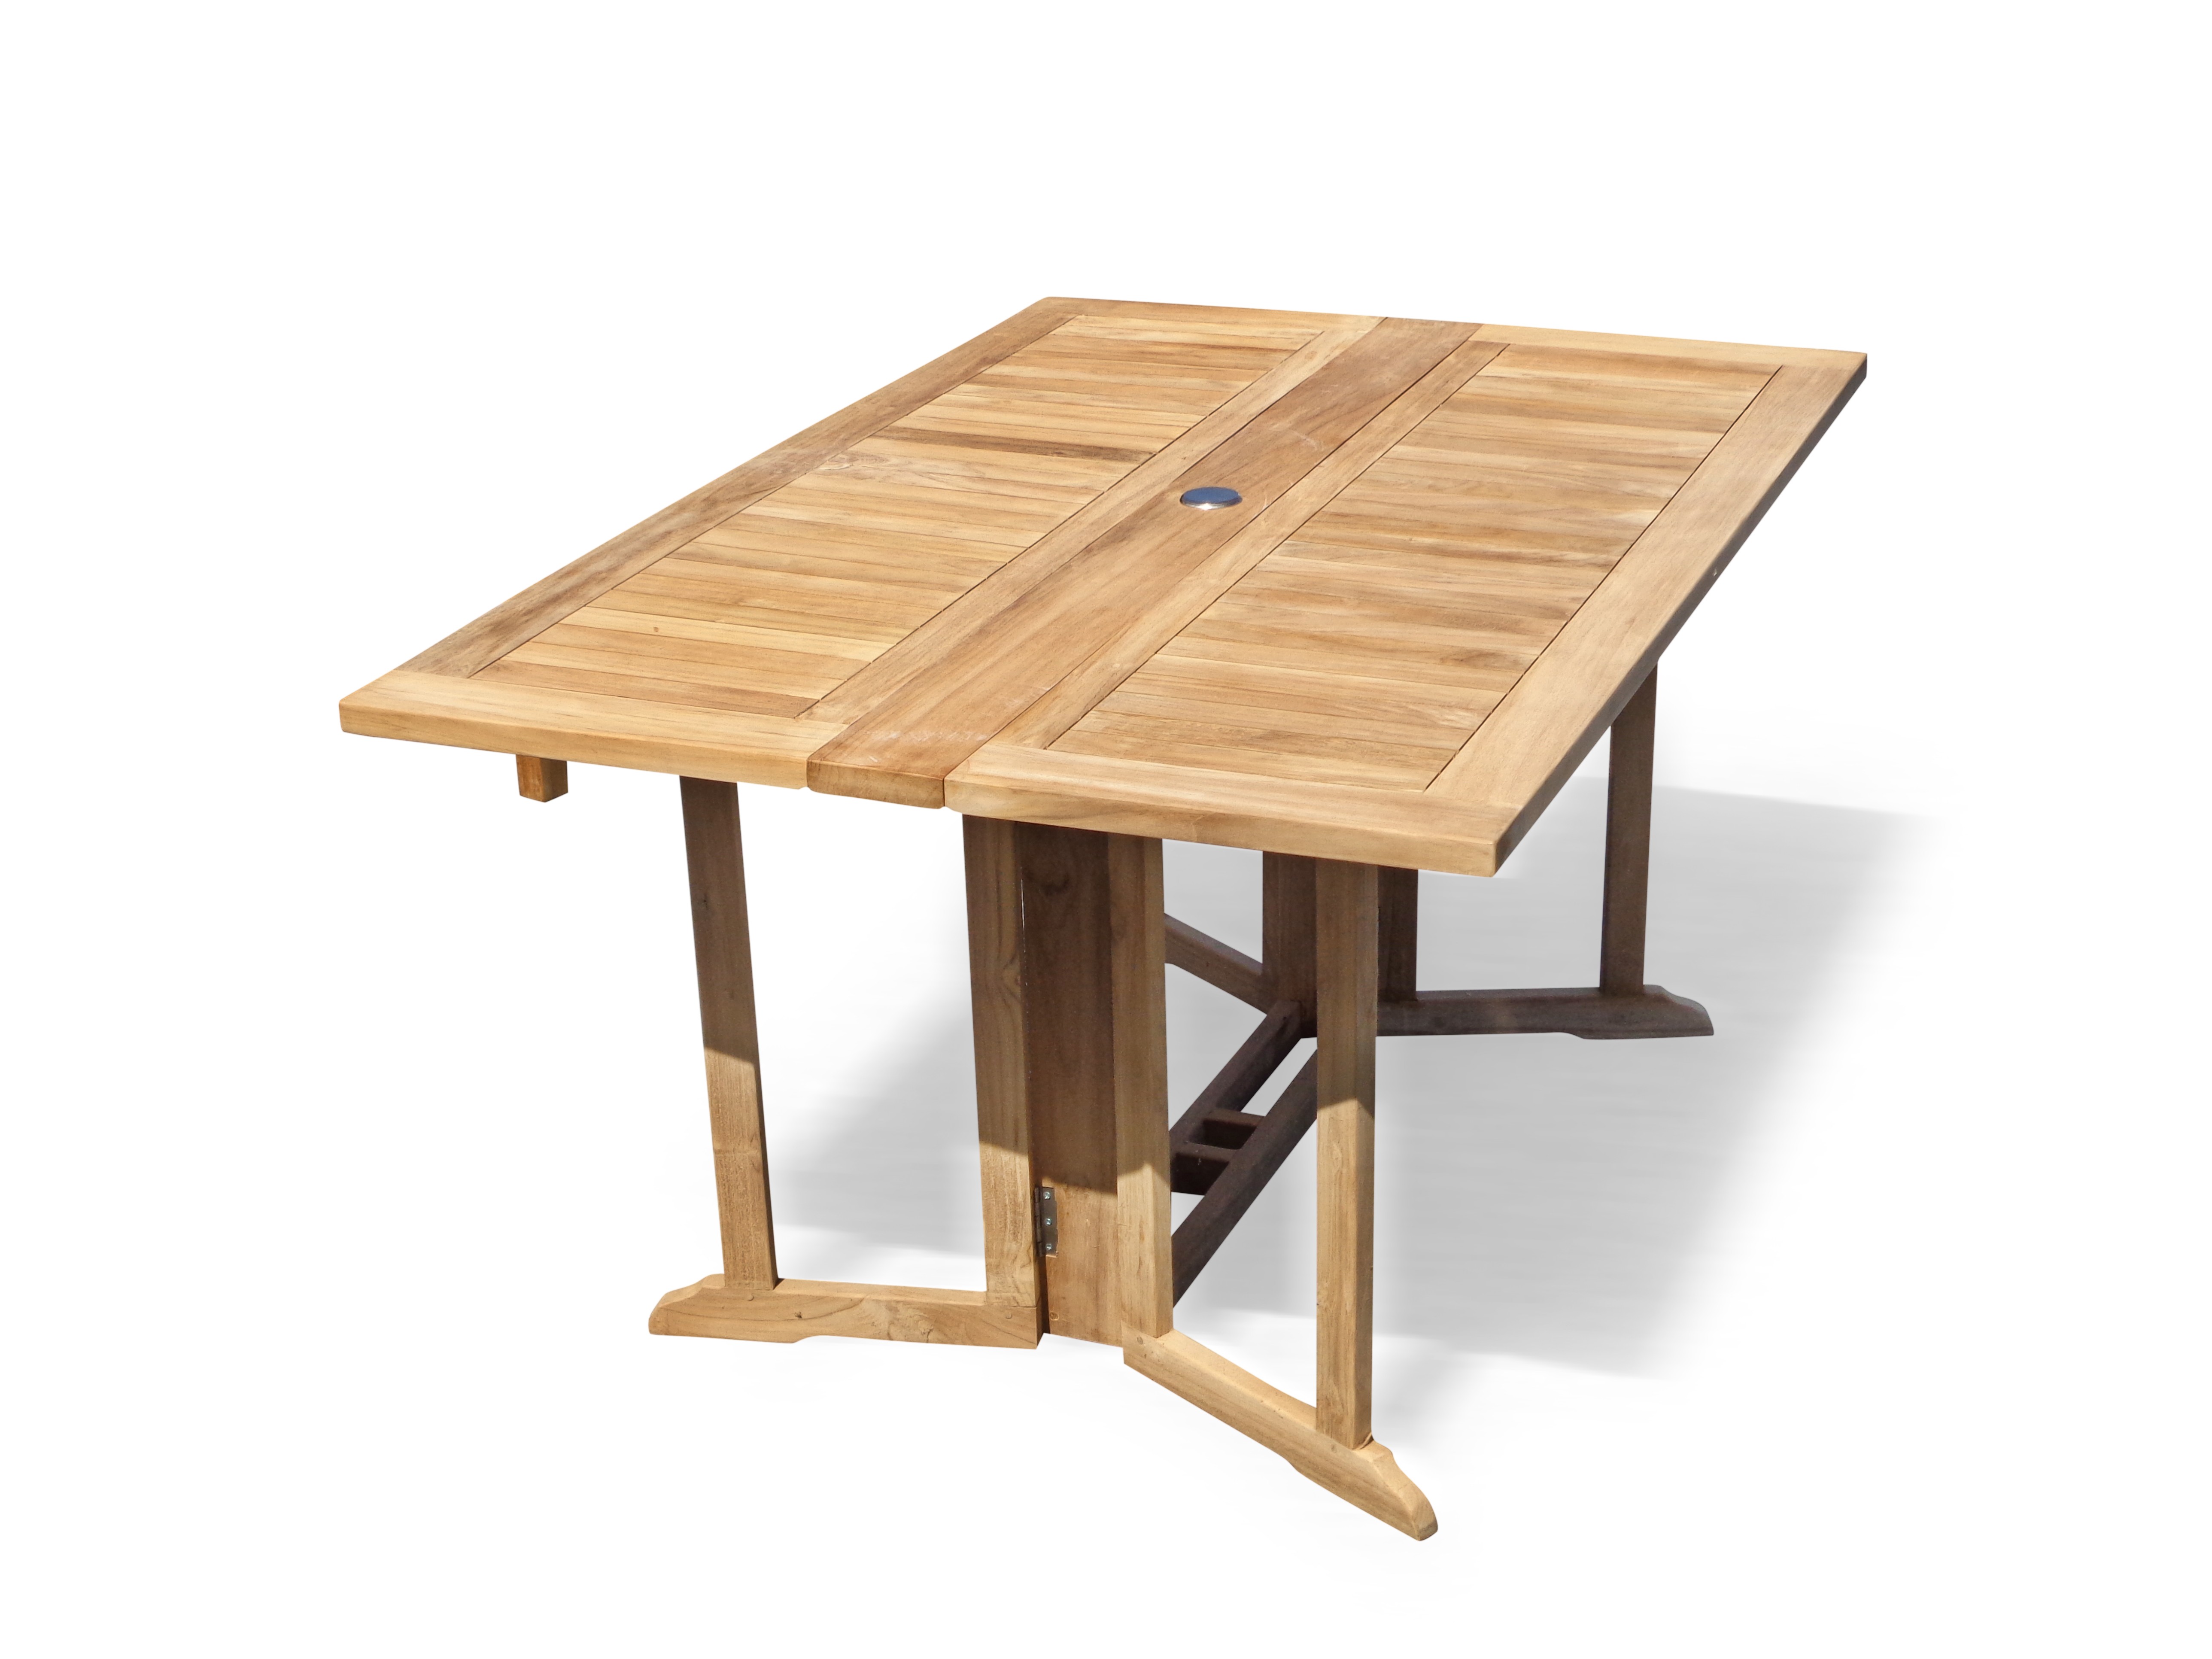 Barcelone 59" x 39" Rectangular Drop Leaf Folding Dining Teak Table...use with 1 Leaf Up or 2.... Makes 2 different tables